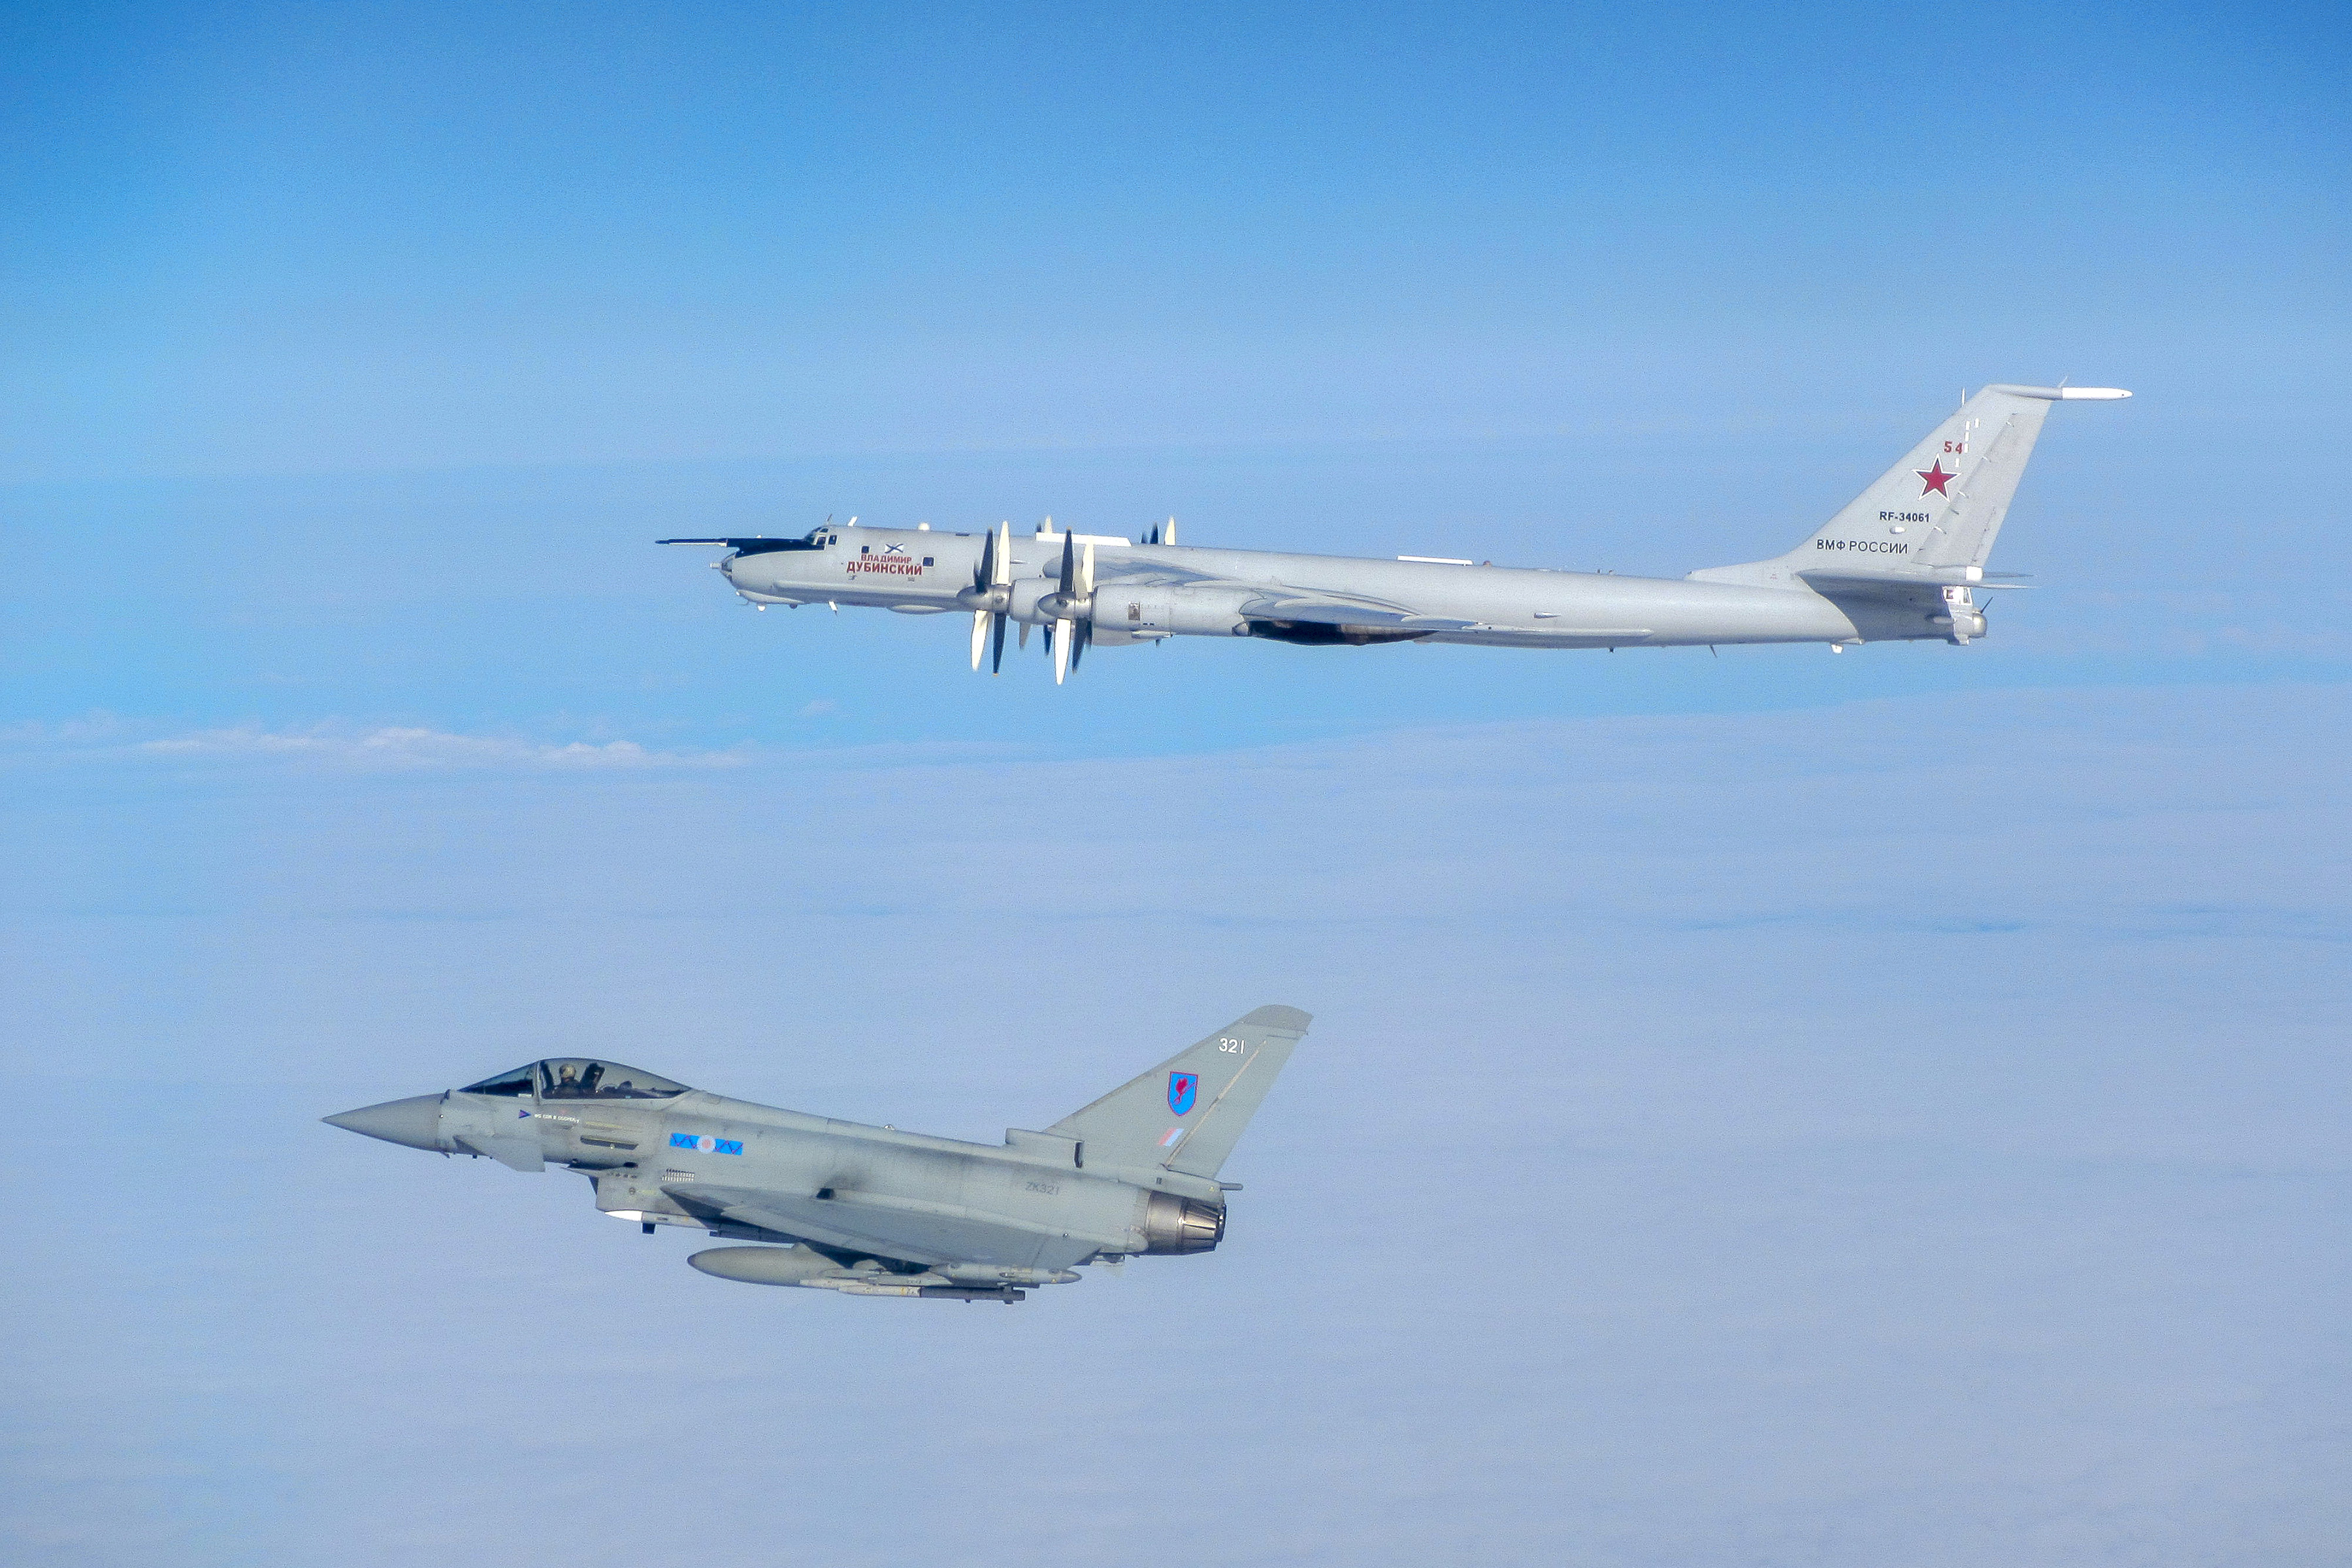 The Russian TU-142 ‘Bear’ Bomber being monitored by a jet from RAF Lossiemouth.